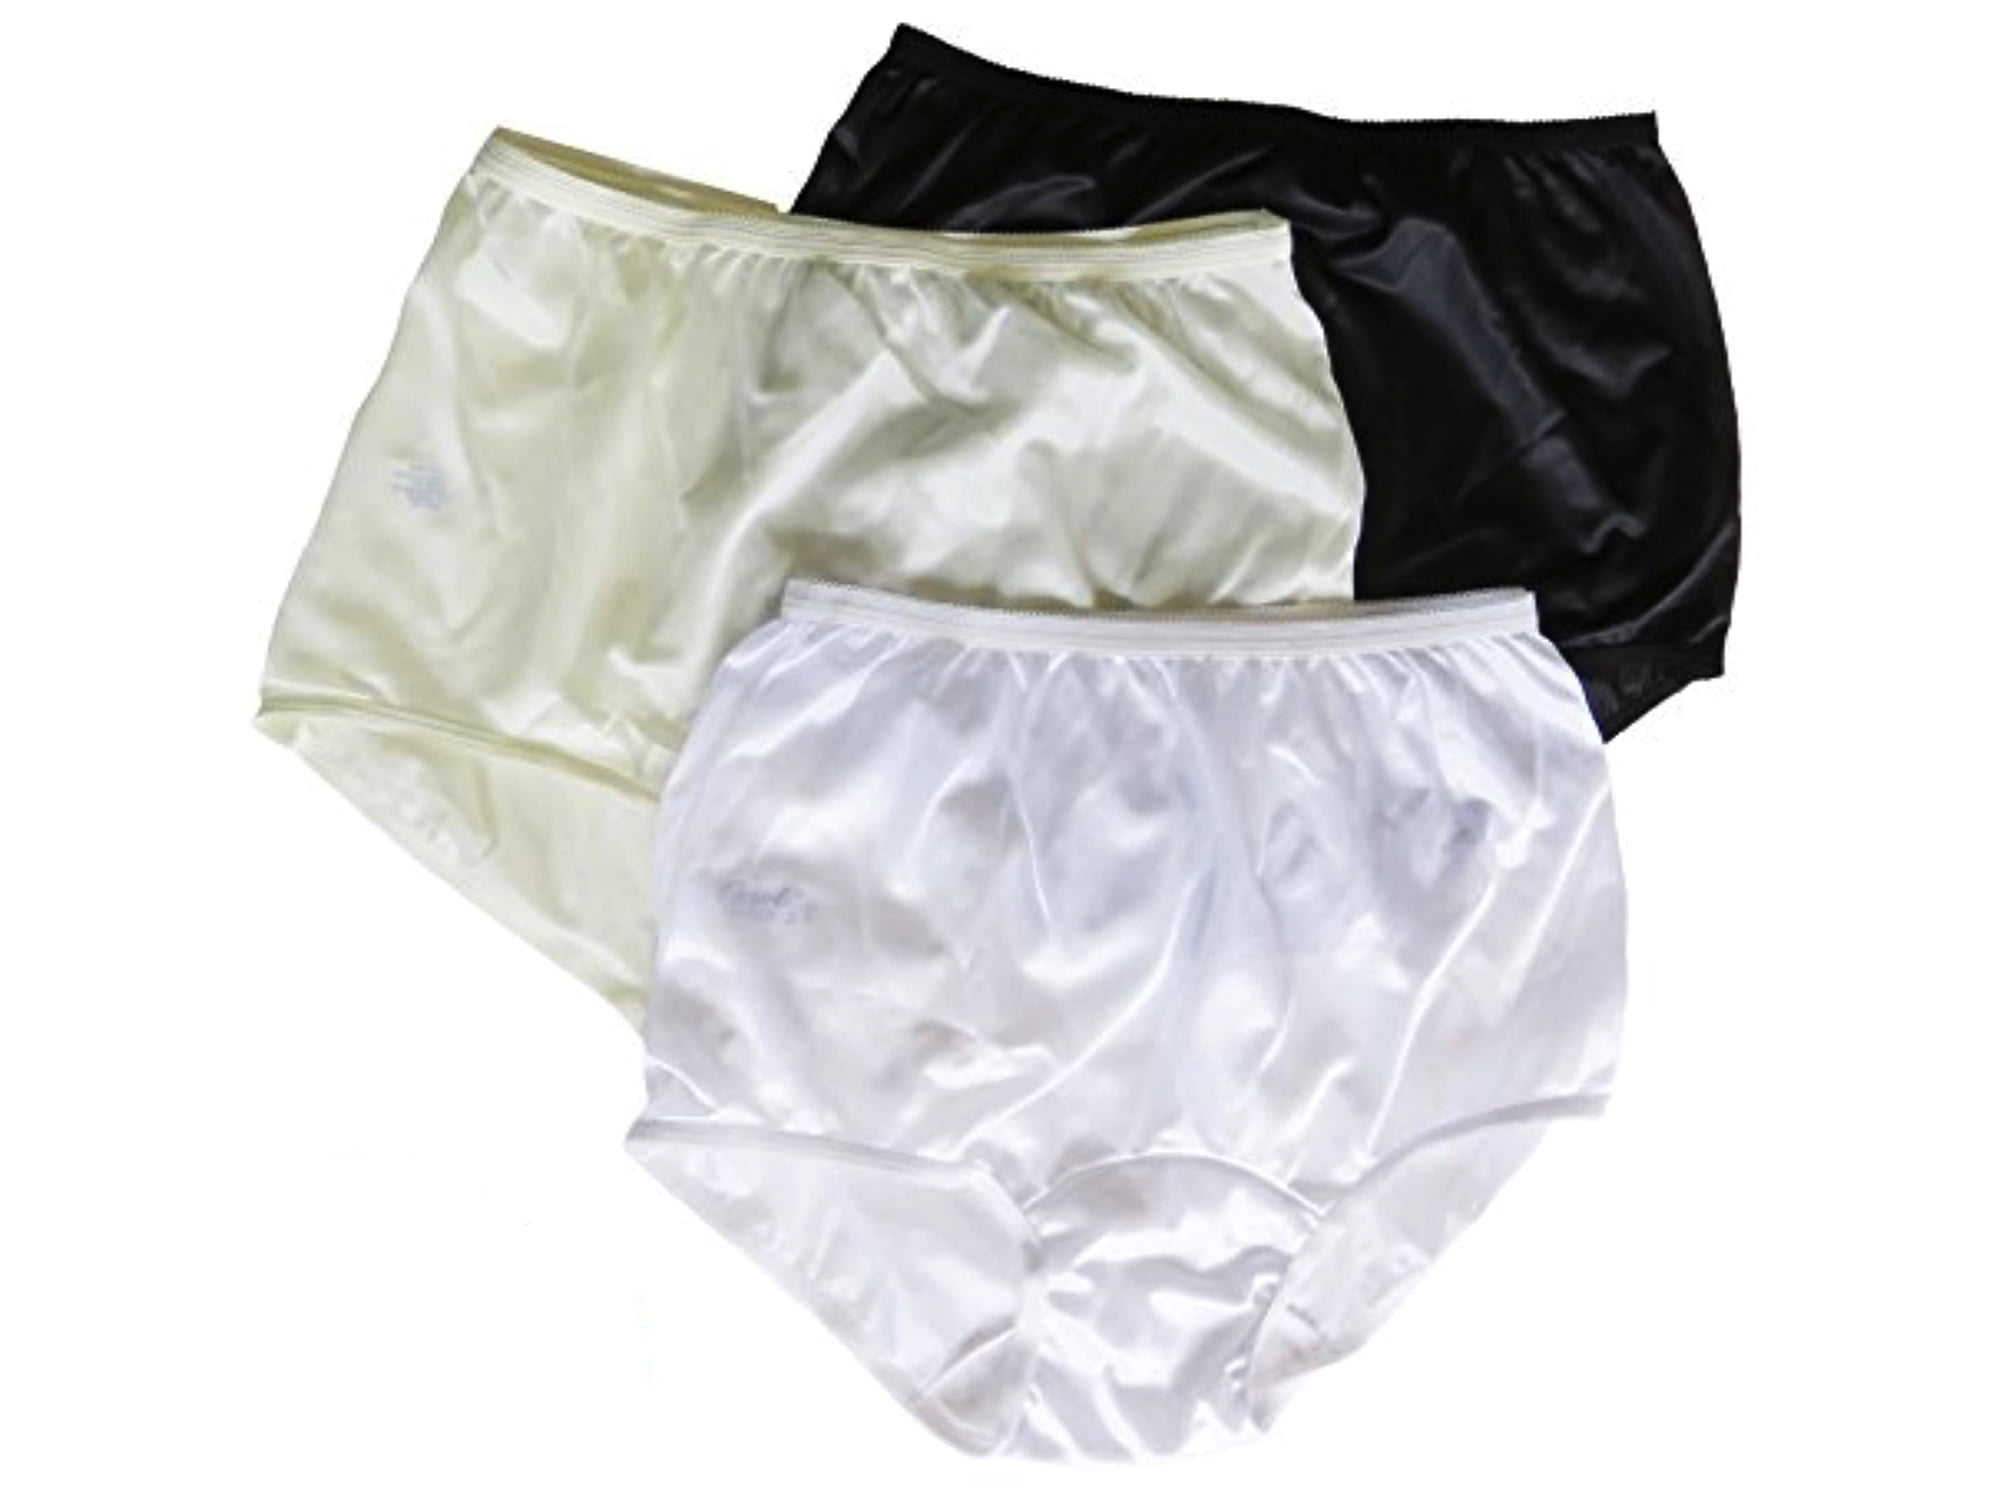 The first panties made for women of size – CarolAnn's Dry Apron